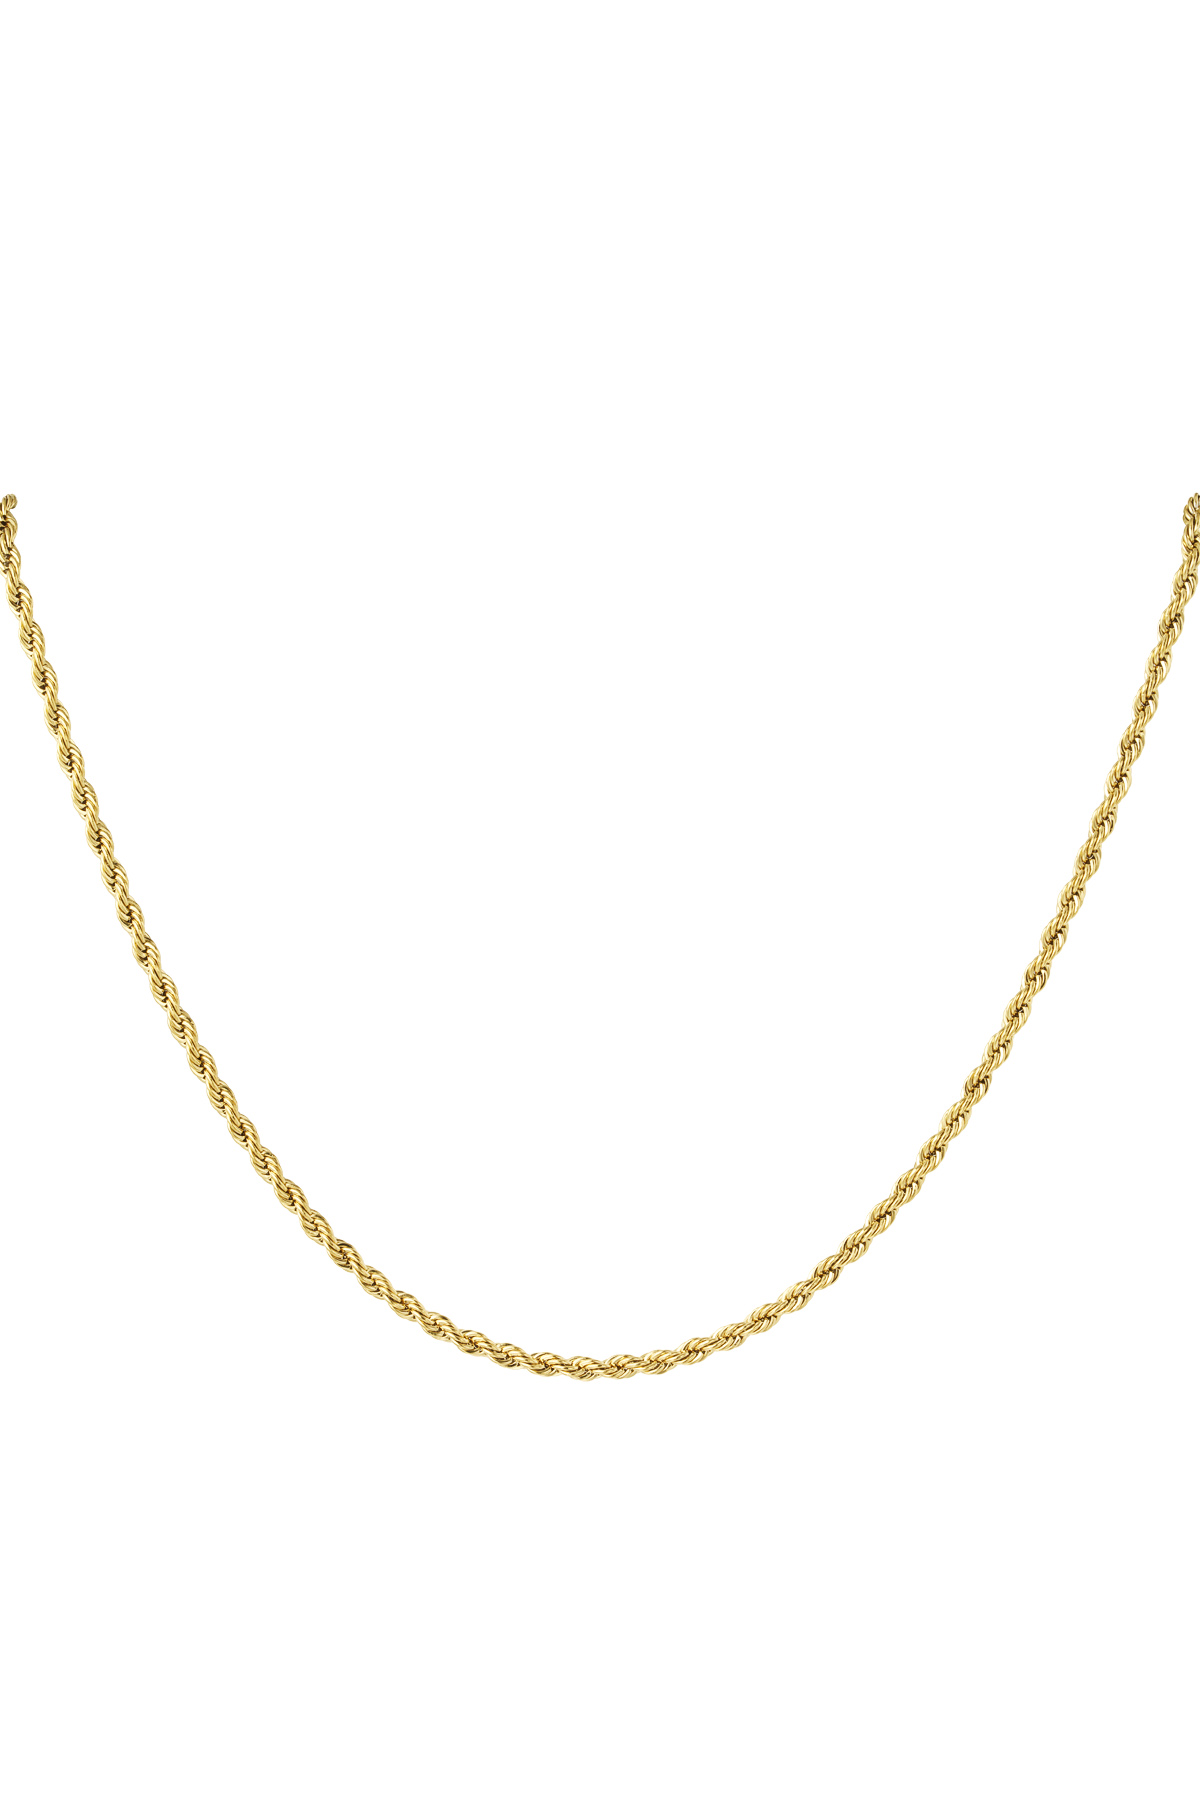 Unisex necklace twisted 60cm - gold